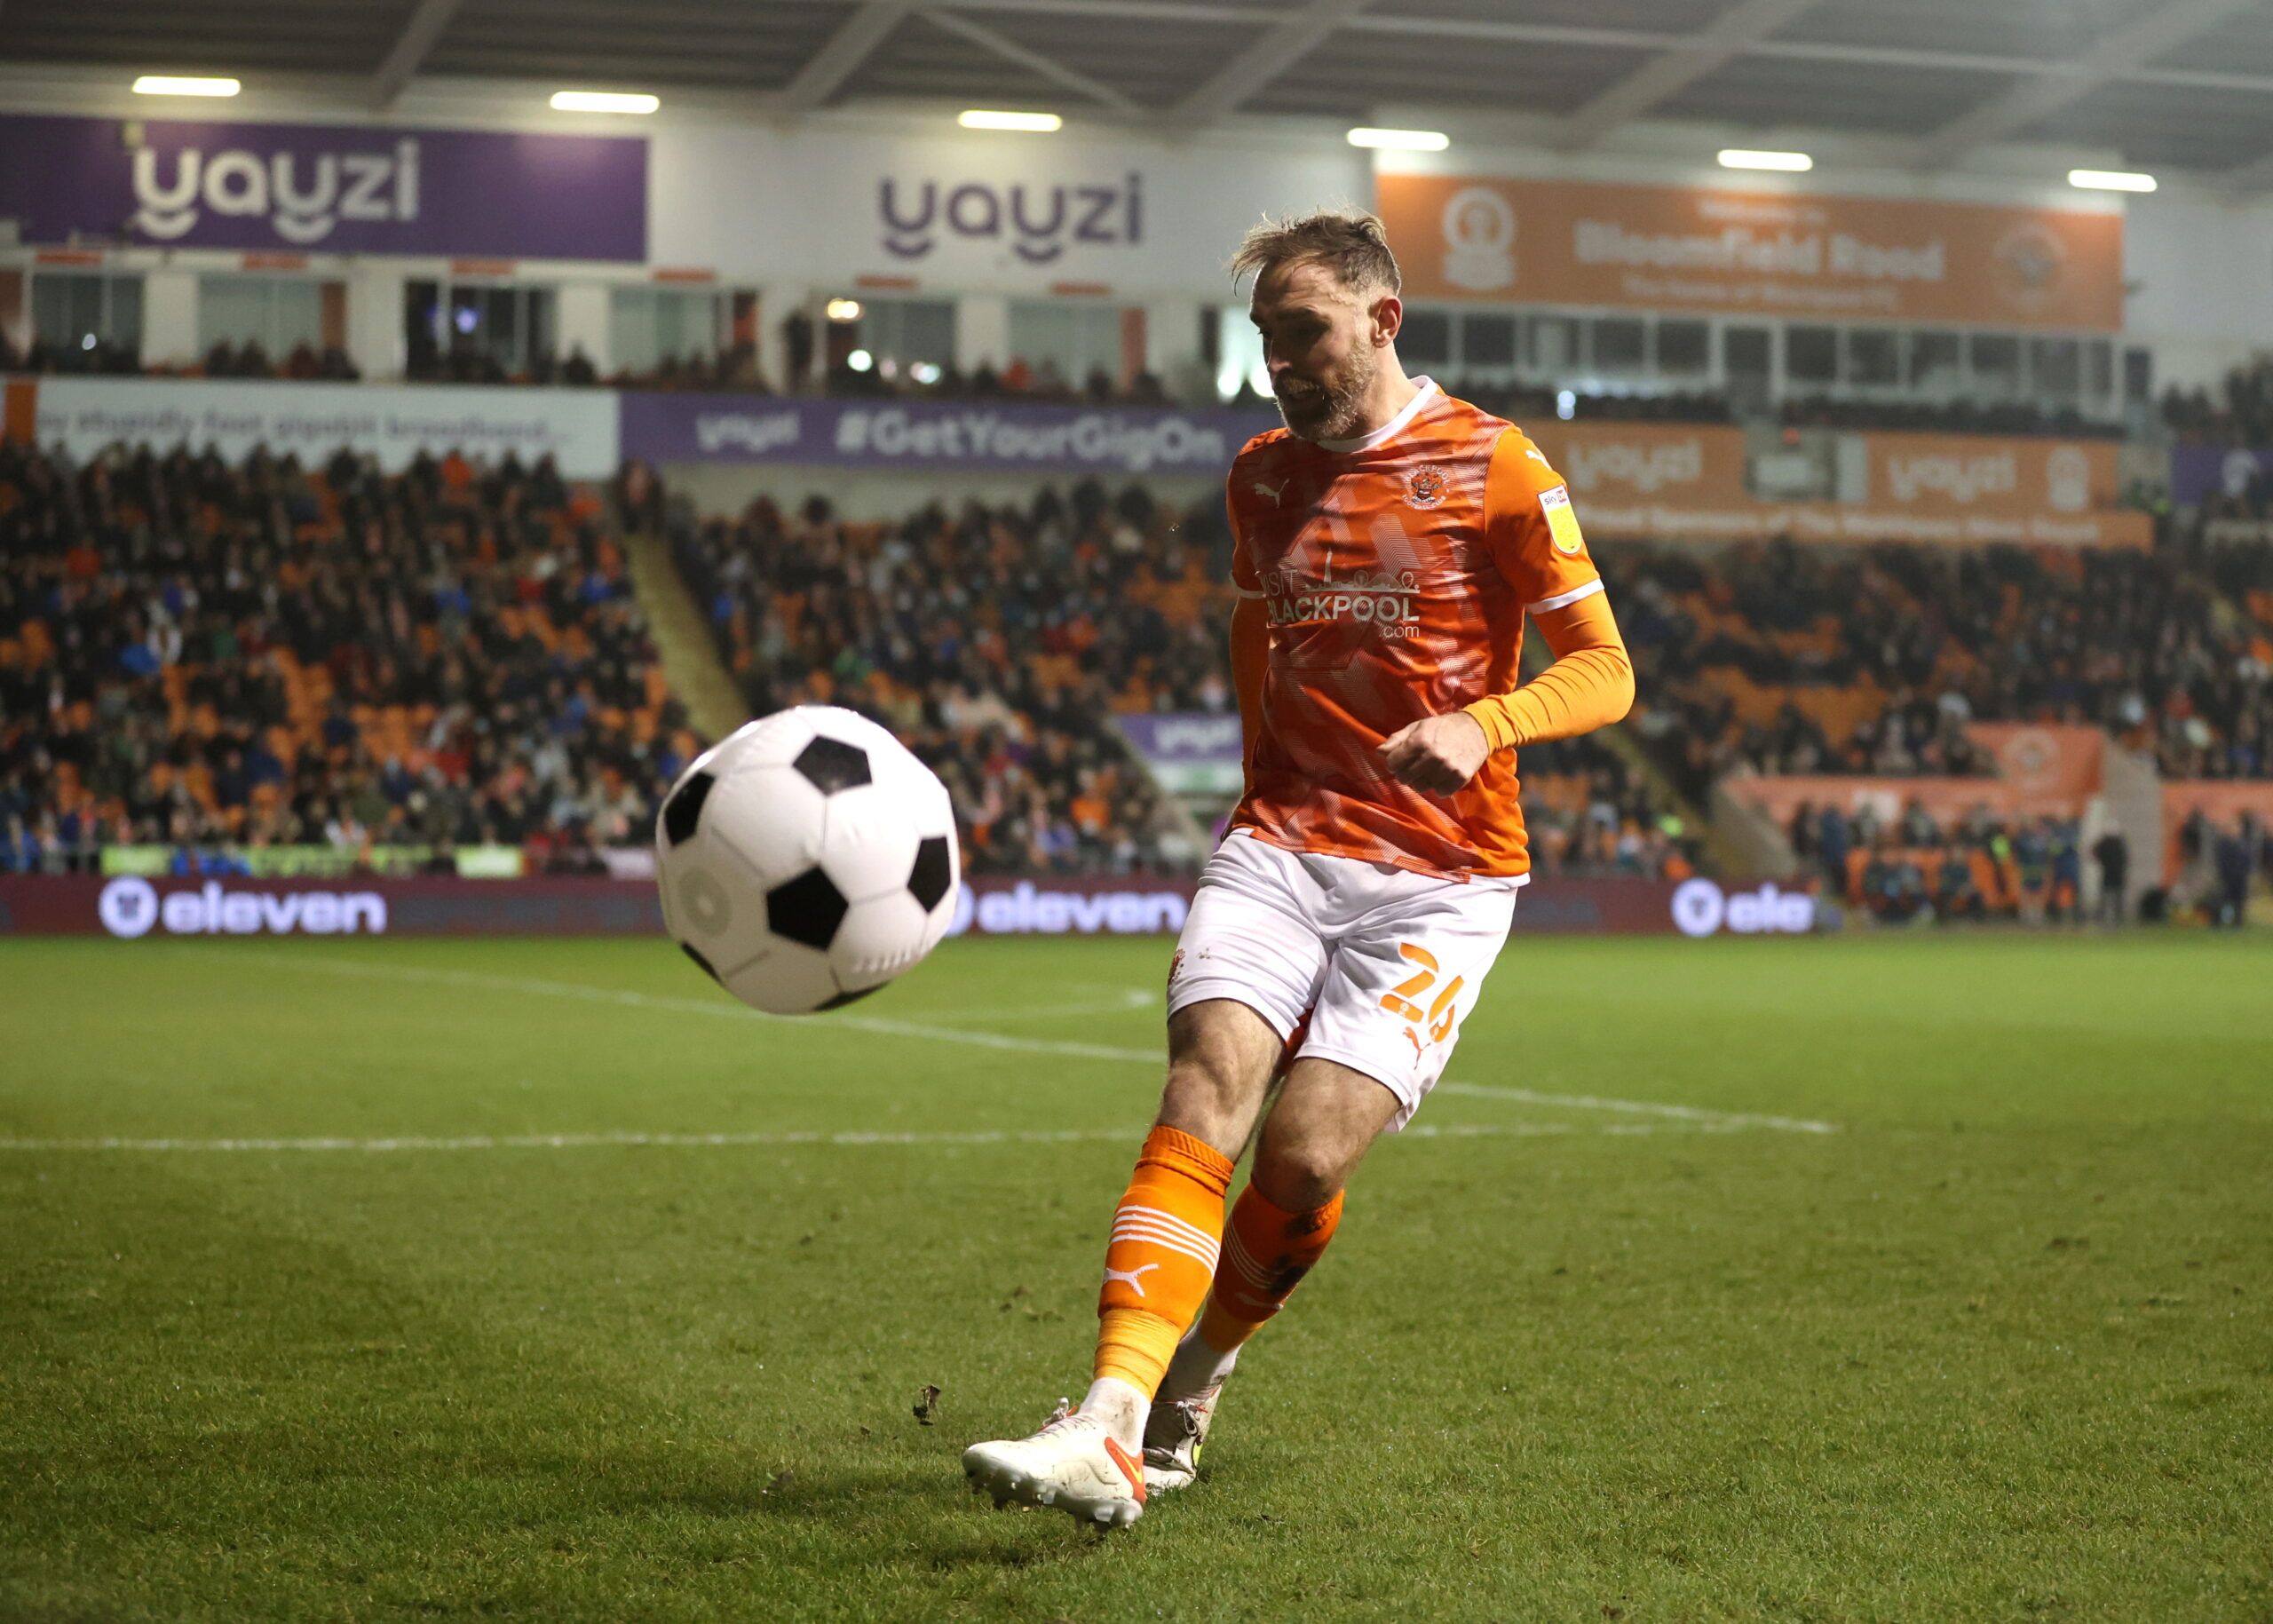 Soccer Football - Championship - Blackpool v Middlesbrough - Bloomfield Road, Blackpool, Britain - December 29, 2021 Blackpool's Richard Keogh kicks an inflatable ball into the crowd    Action Images/Molly Darlington  EDITORIAL USE ONLY. No use with unauthorized audio, video, data, fixture lists, club/league logos or 